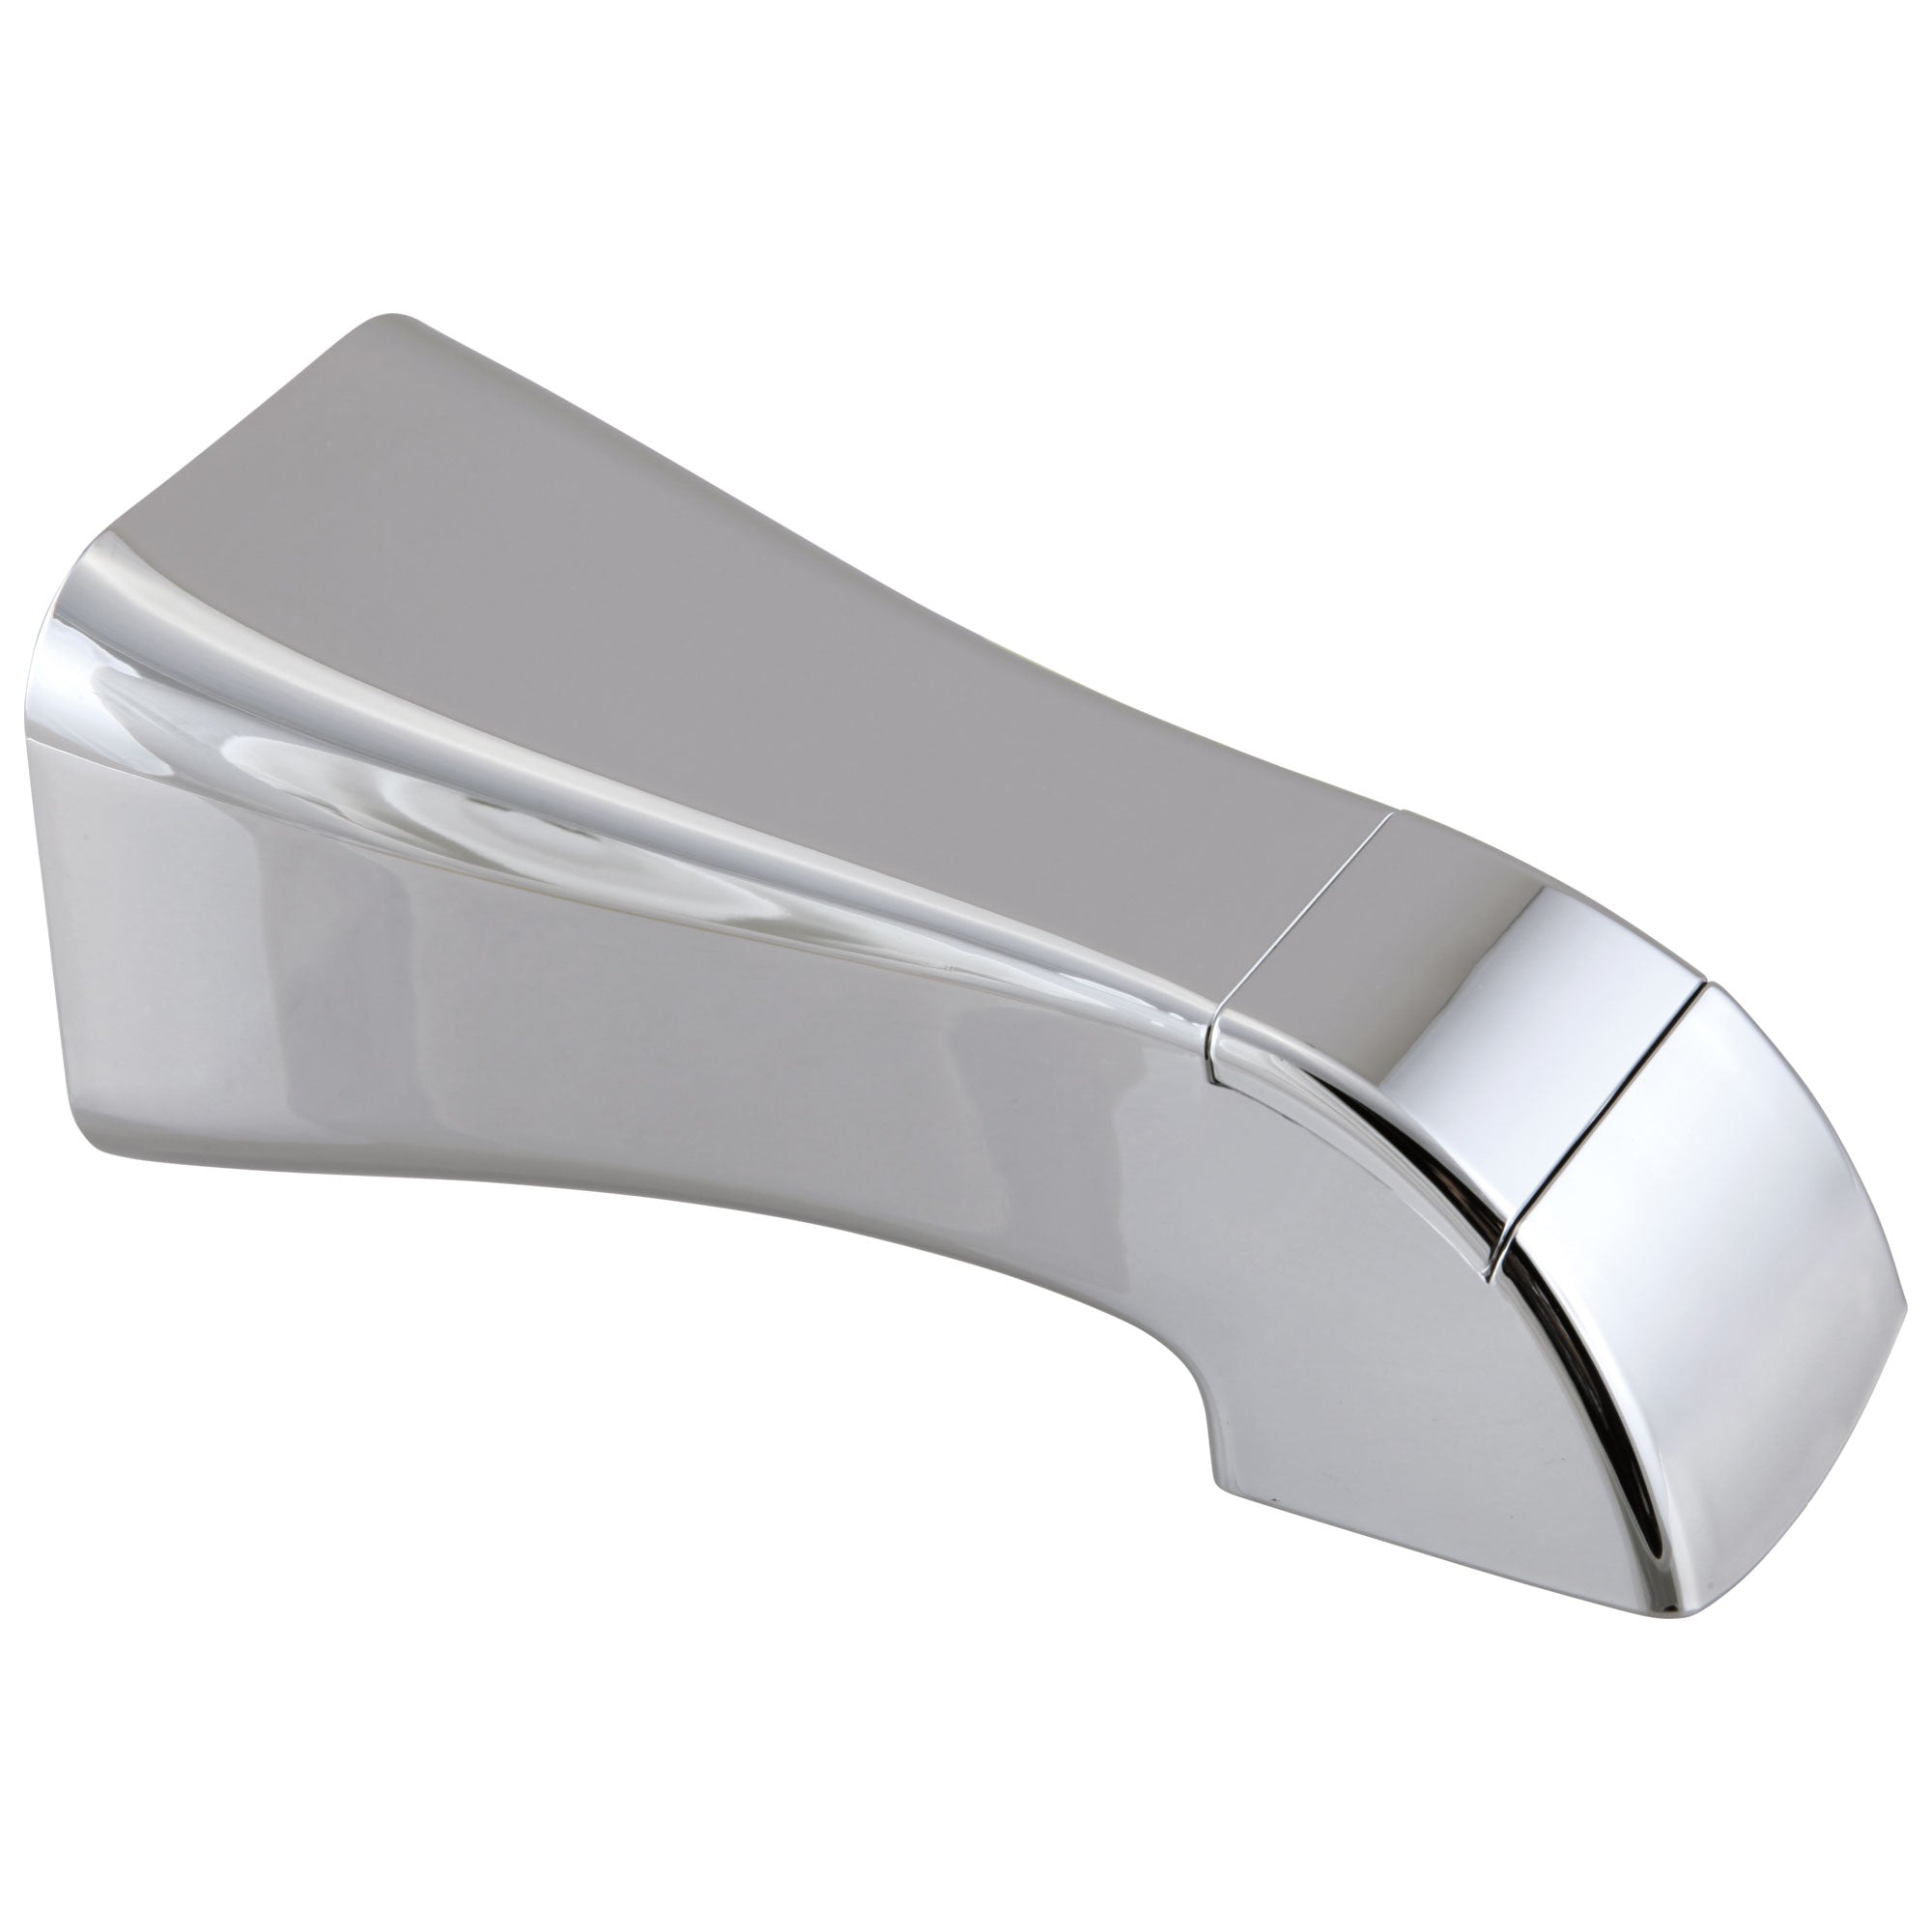 Delta Tesla Collection Chrome Finish Wall Mounted Modern Pull-Up Diverter Bath Tub Spout DRP78735